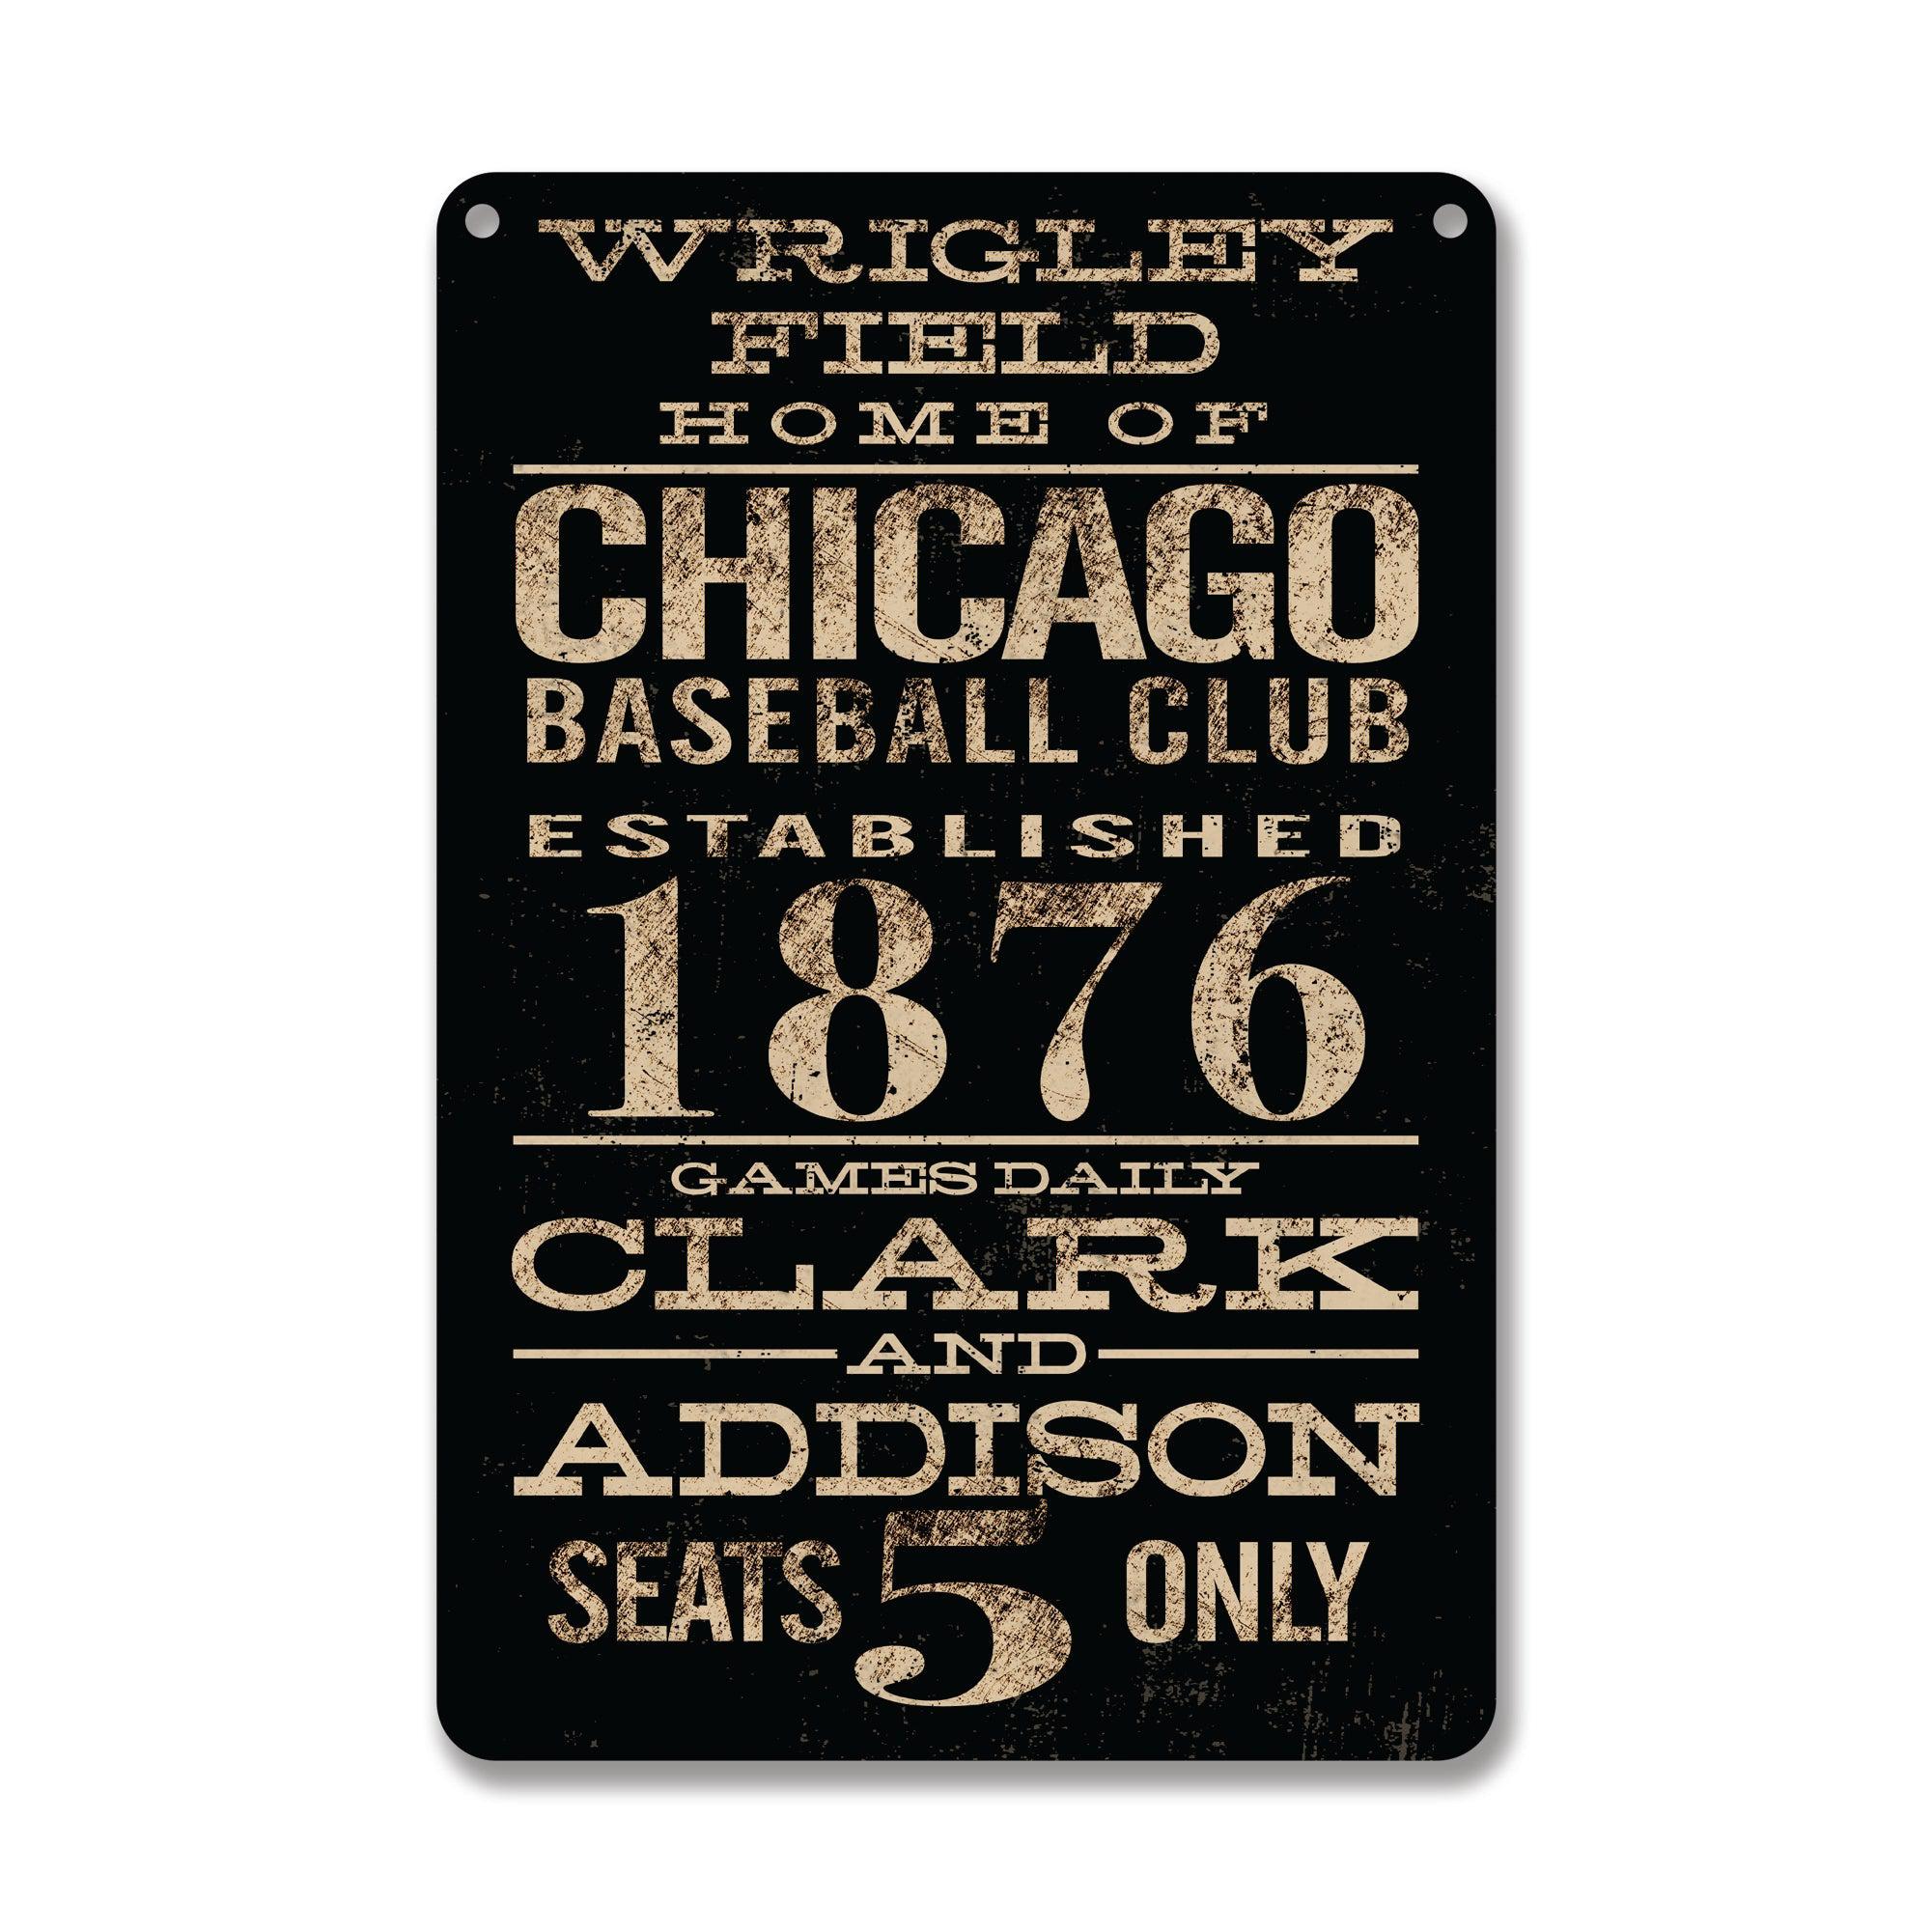 WRIGLEY FIELD RICO HOME OF THE CHICAGO BASEBALL CLUB BLACK SIGN – Ivy Shop